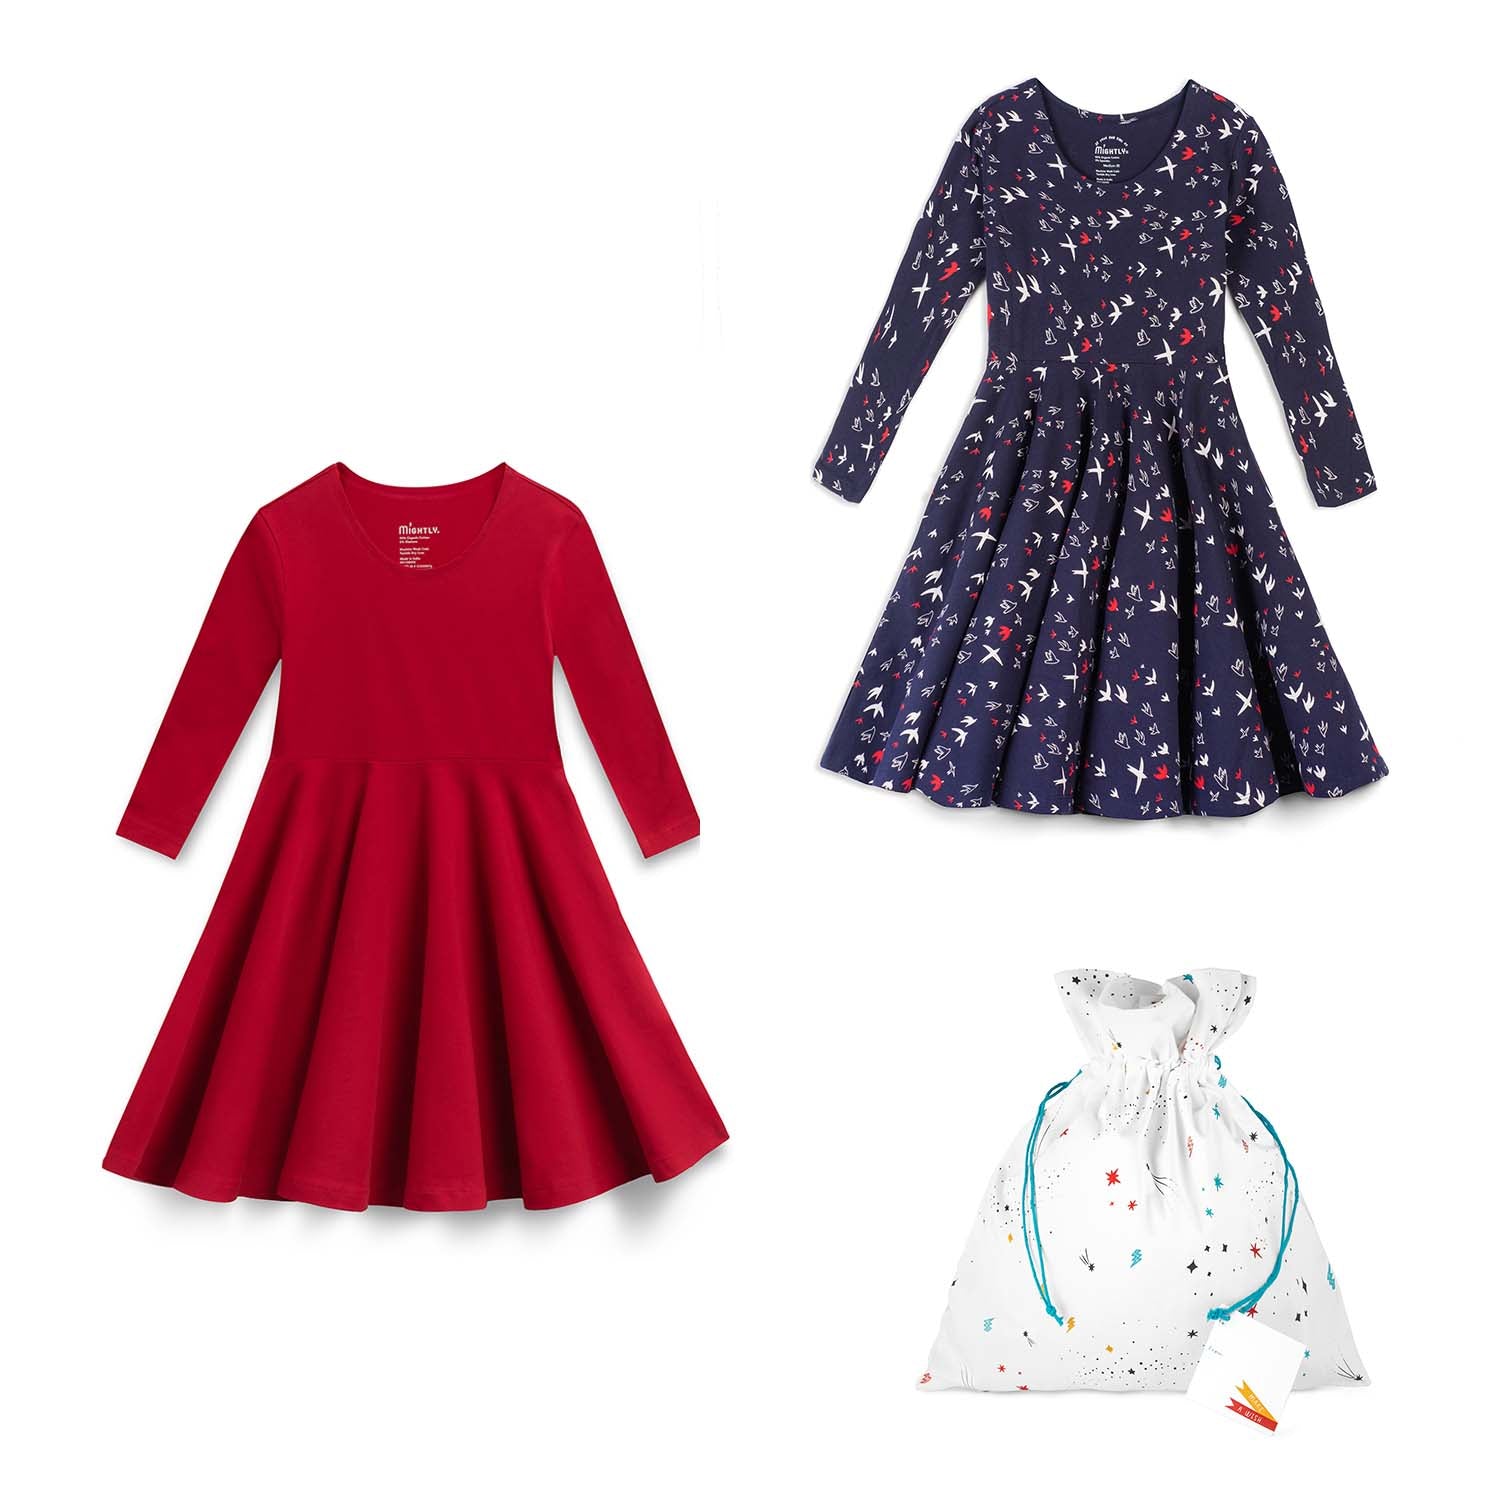 Gift Set: Two Holiday Twirl Dresses with a Reusable Fabric Gift Bag